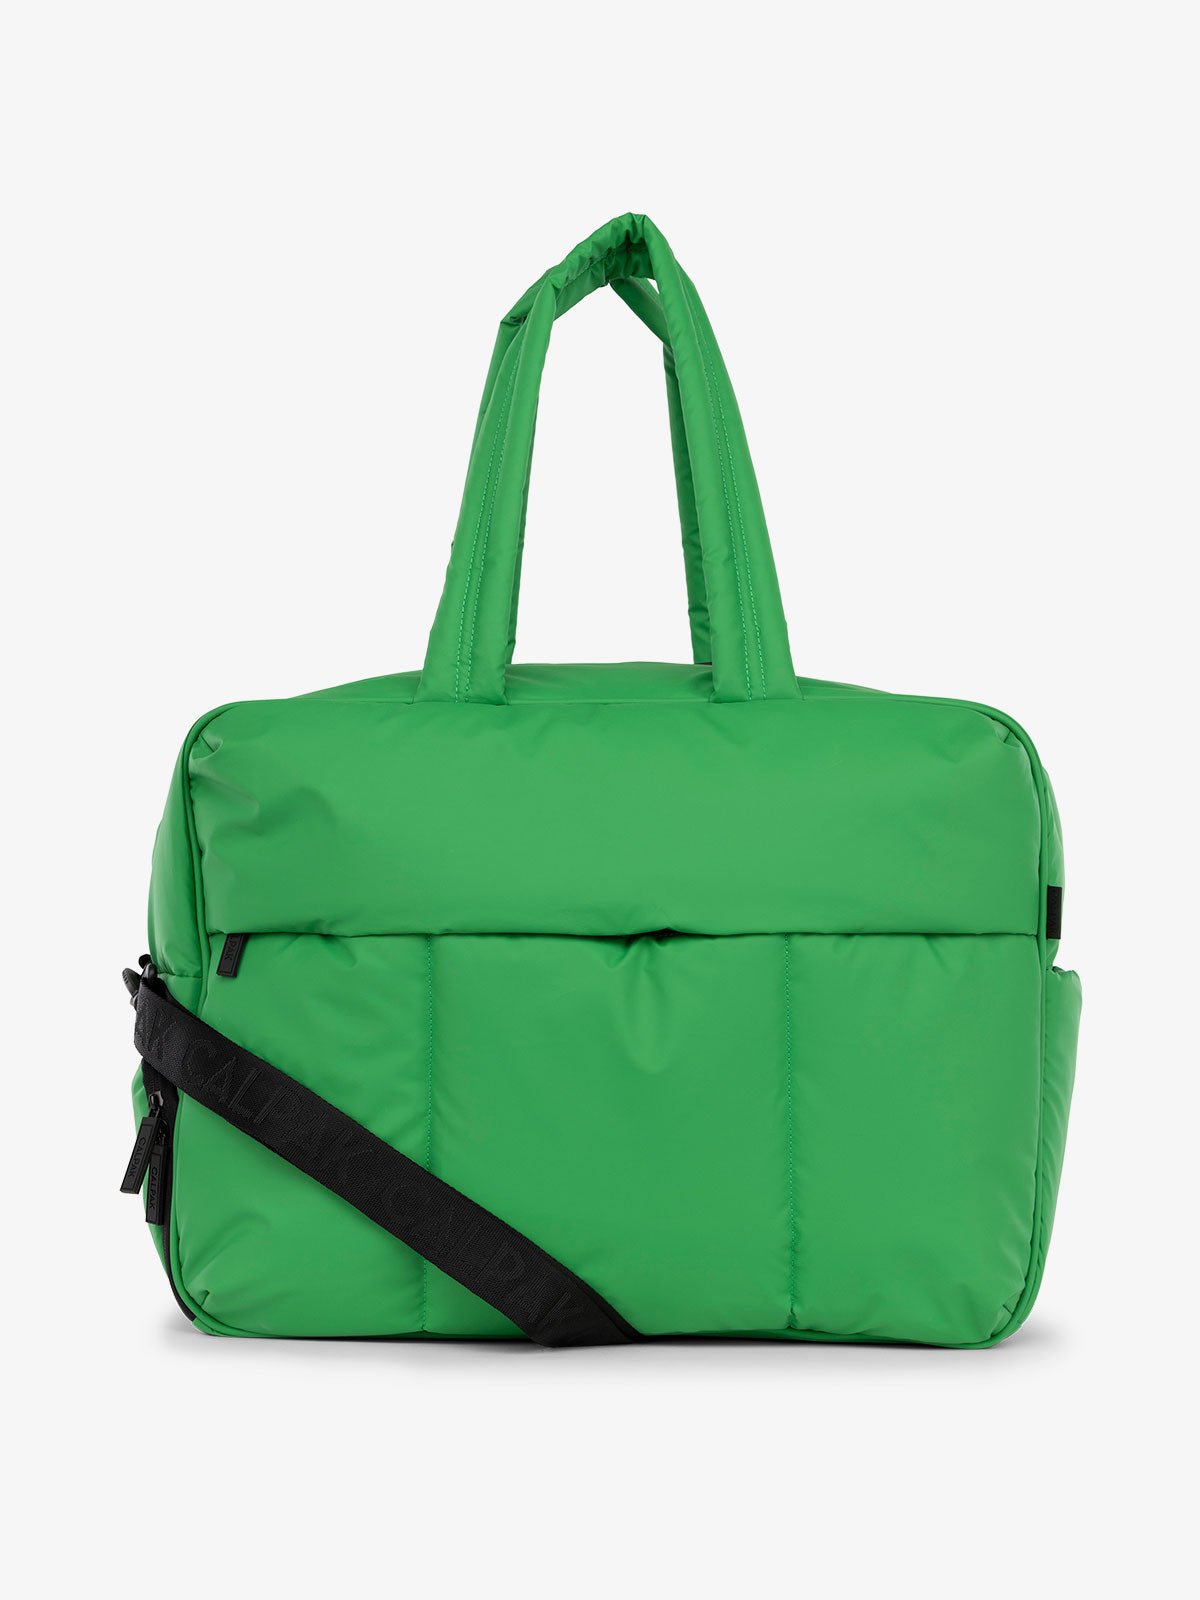 CALPAK Luka large duffle bag with detachable strap and zippered front pocket in green apple